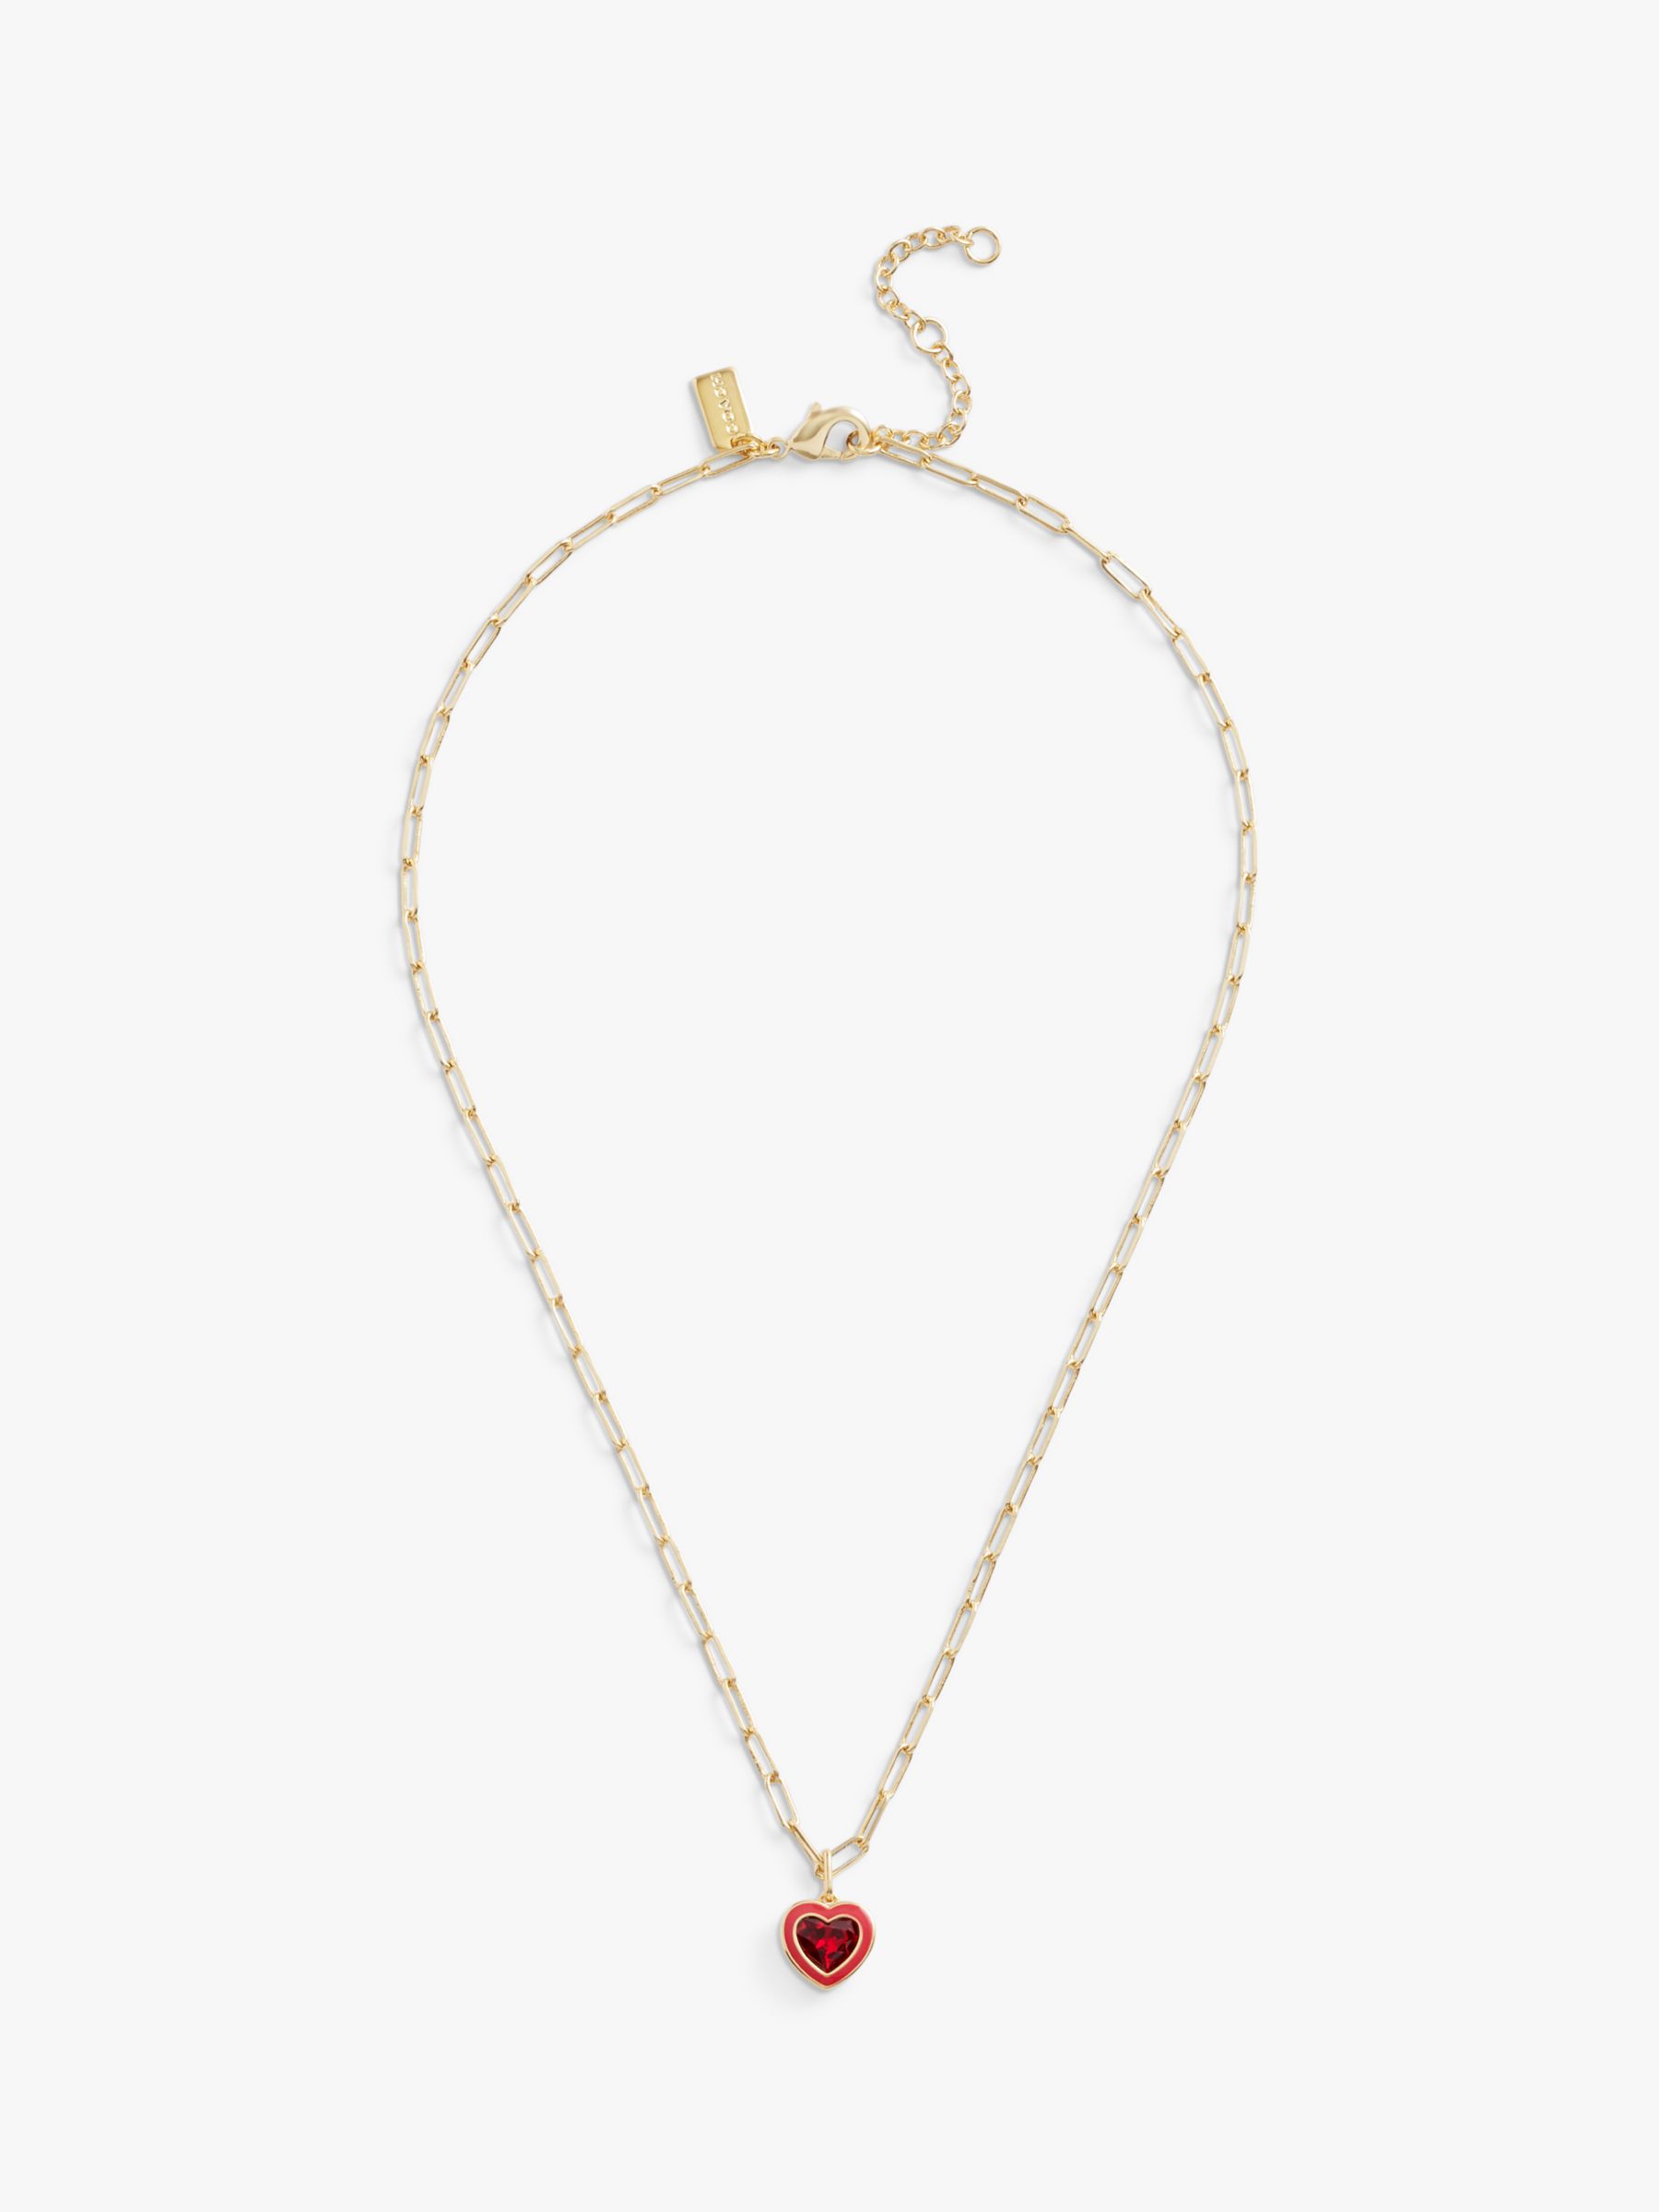 Coach Crystal and Enamel Heart Pendant Necklace and Stud Earrings Jewellery Gift Set, Gold/Red